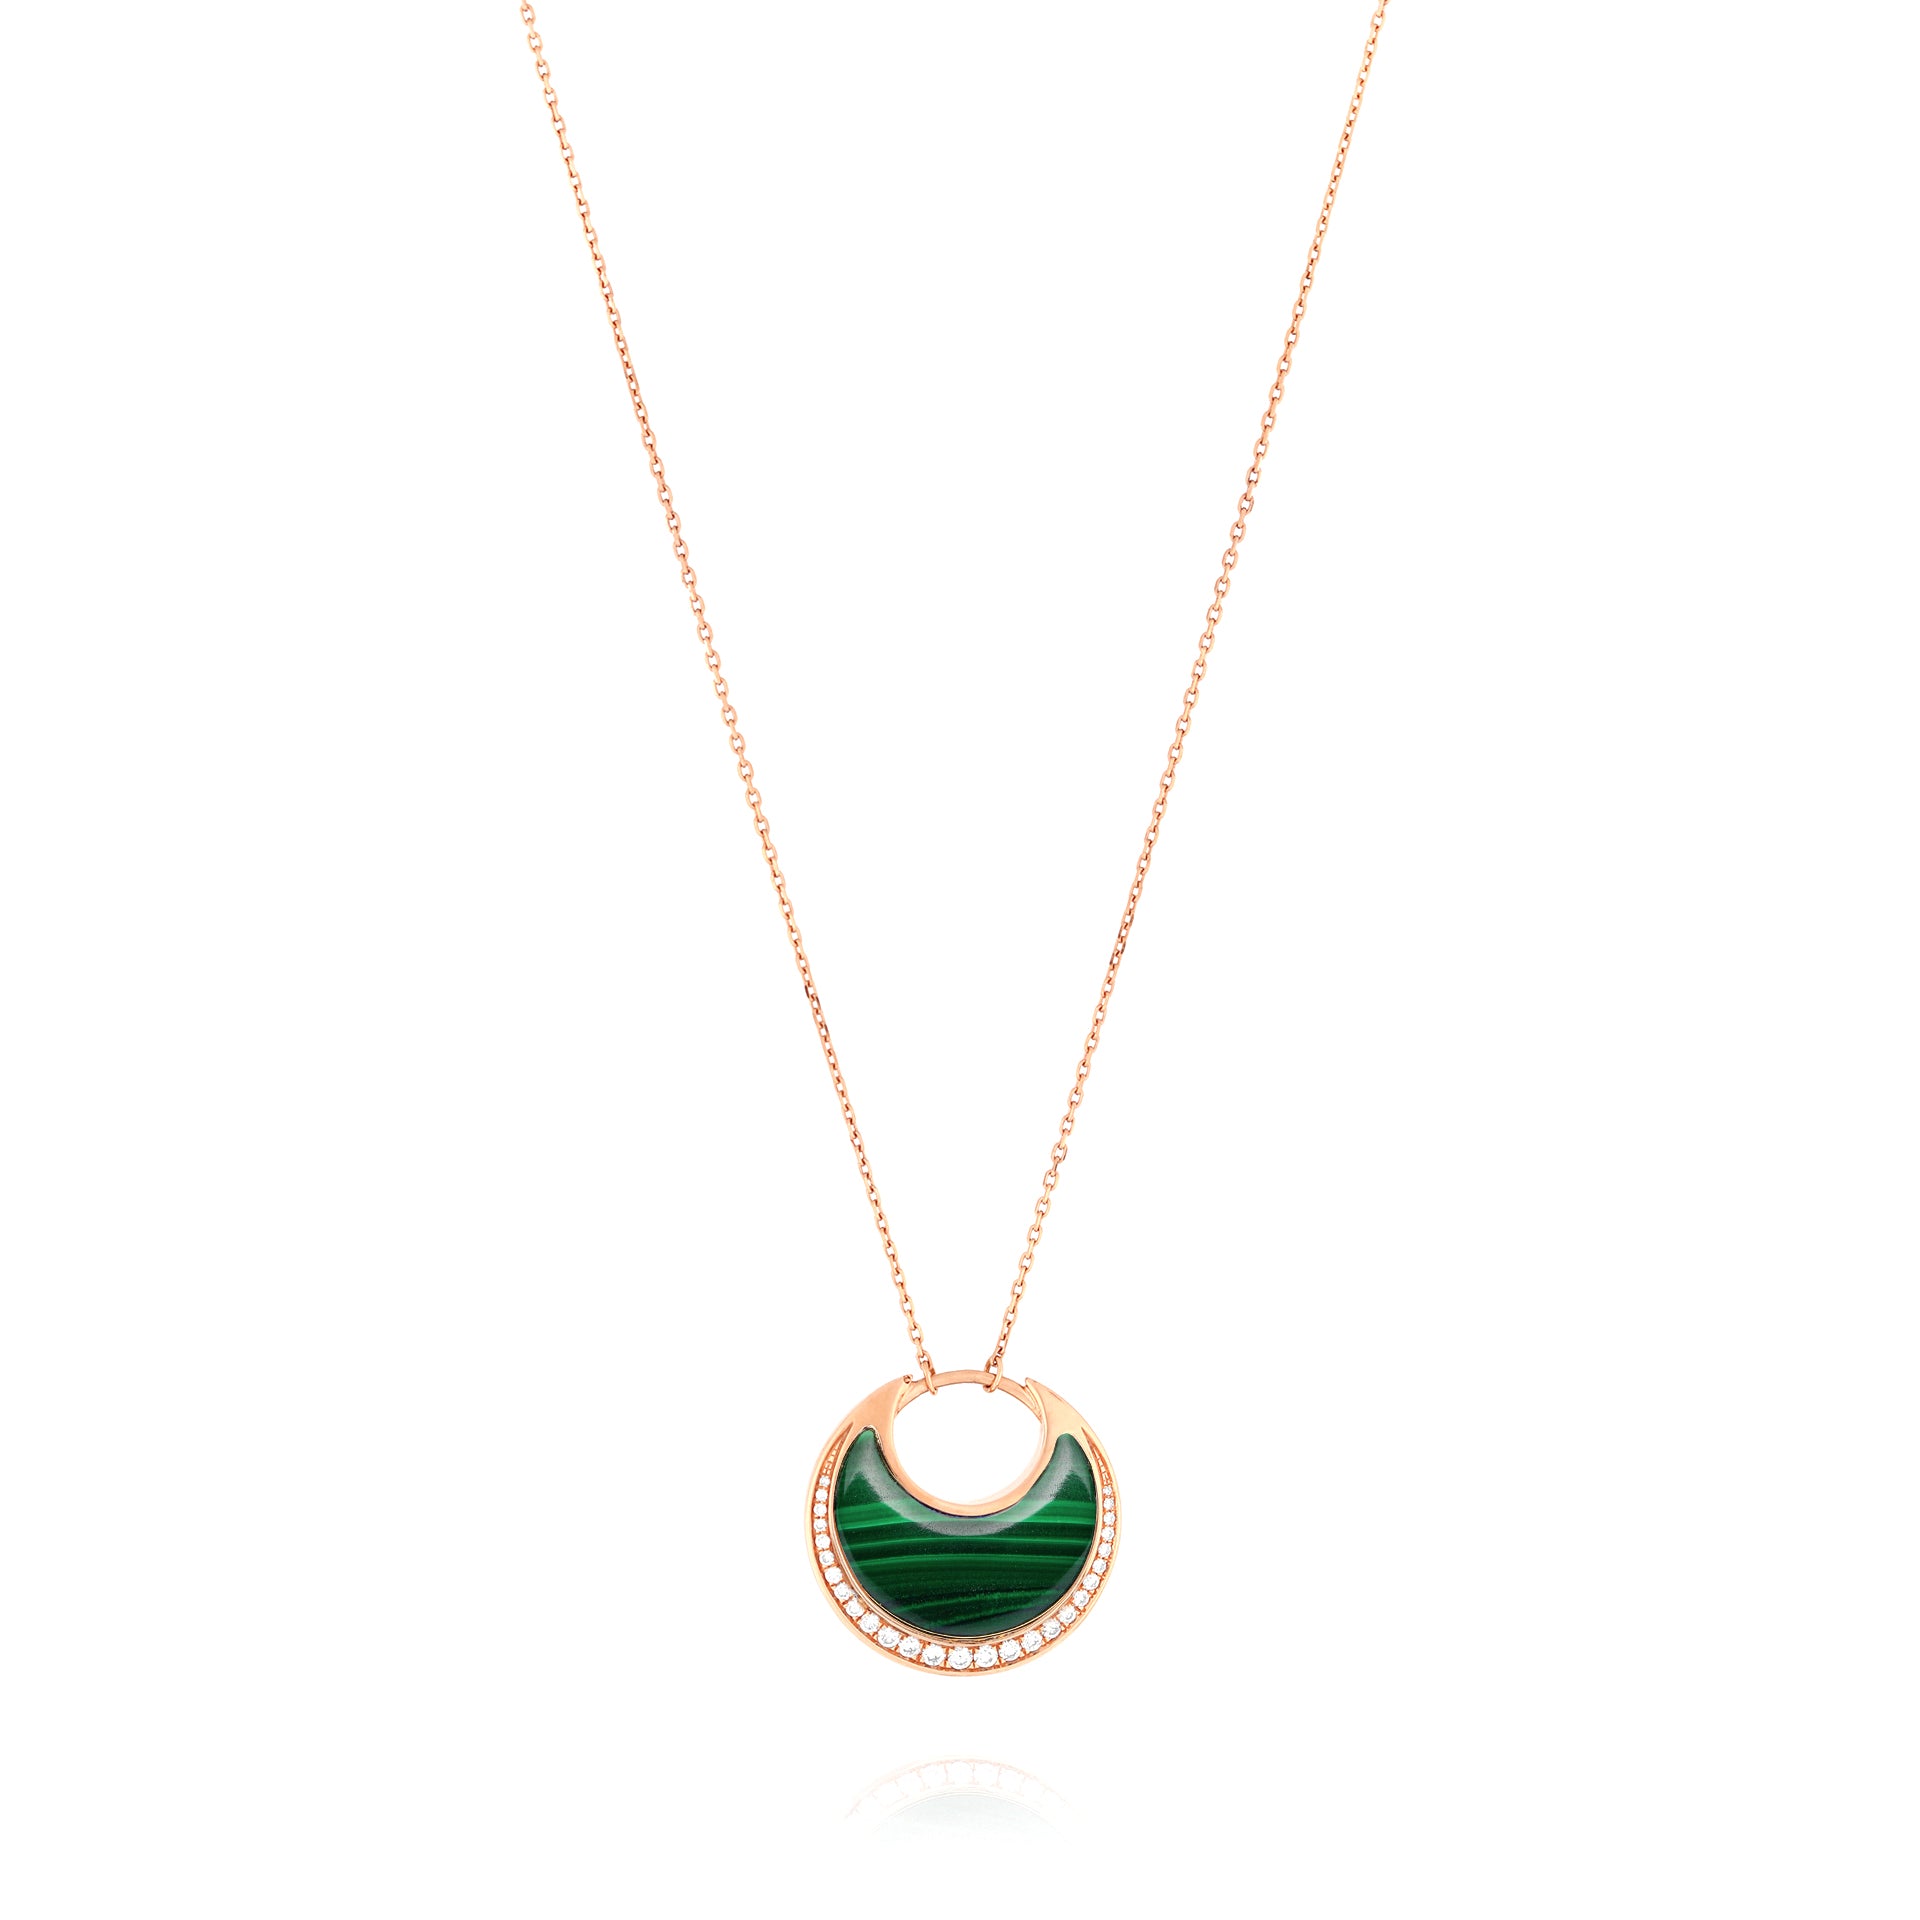 Al Hilal necklace in yellow gold with malachite stones and diamonds